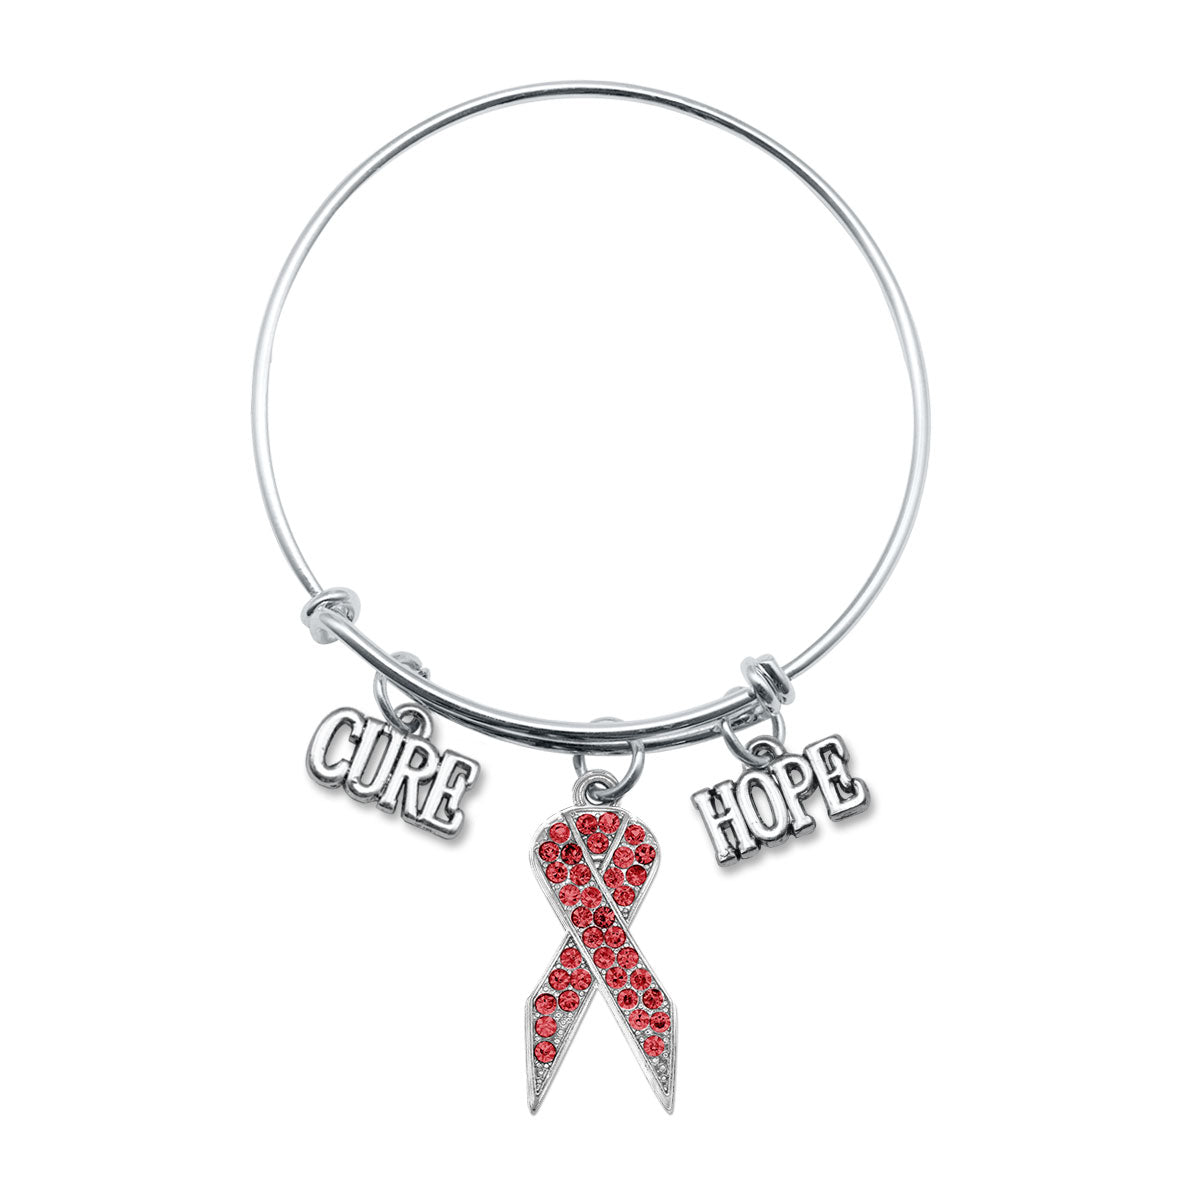 Silver Hope Red Awareness Ribbon Charm Wire Bangle Bracelet